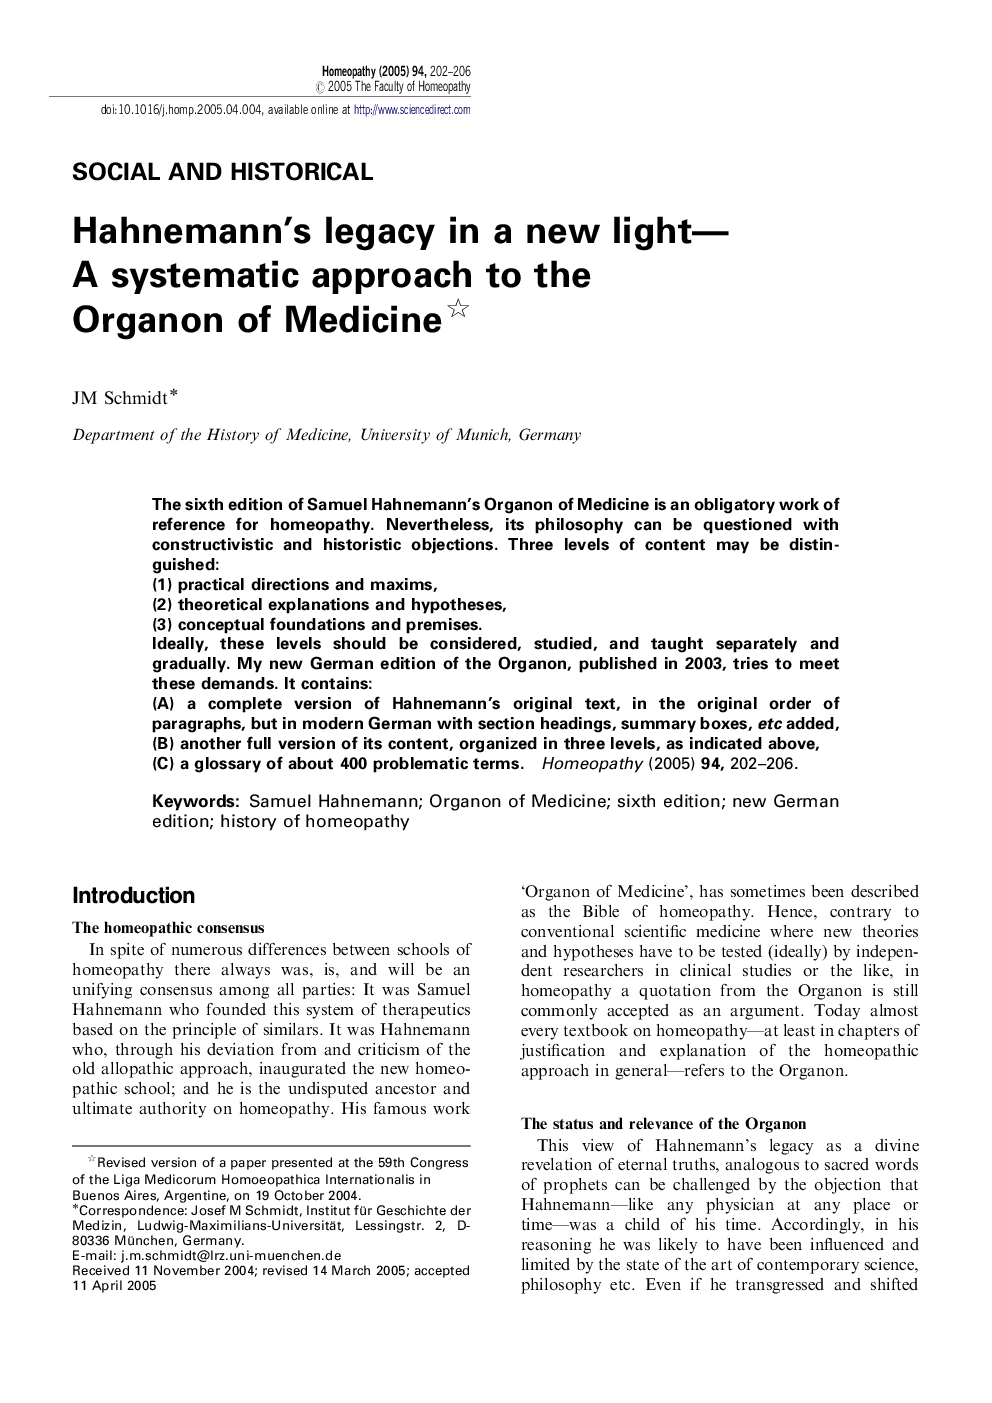 Hahnemann's legacy in a new light-A systematic approach to the Organon of Medicine